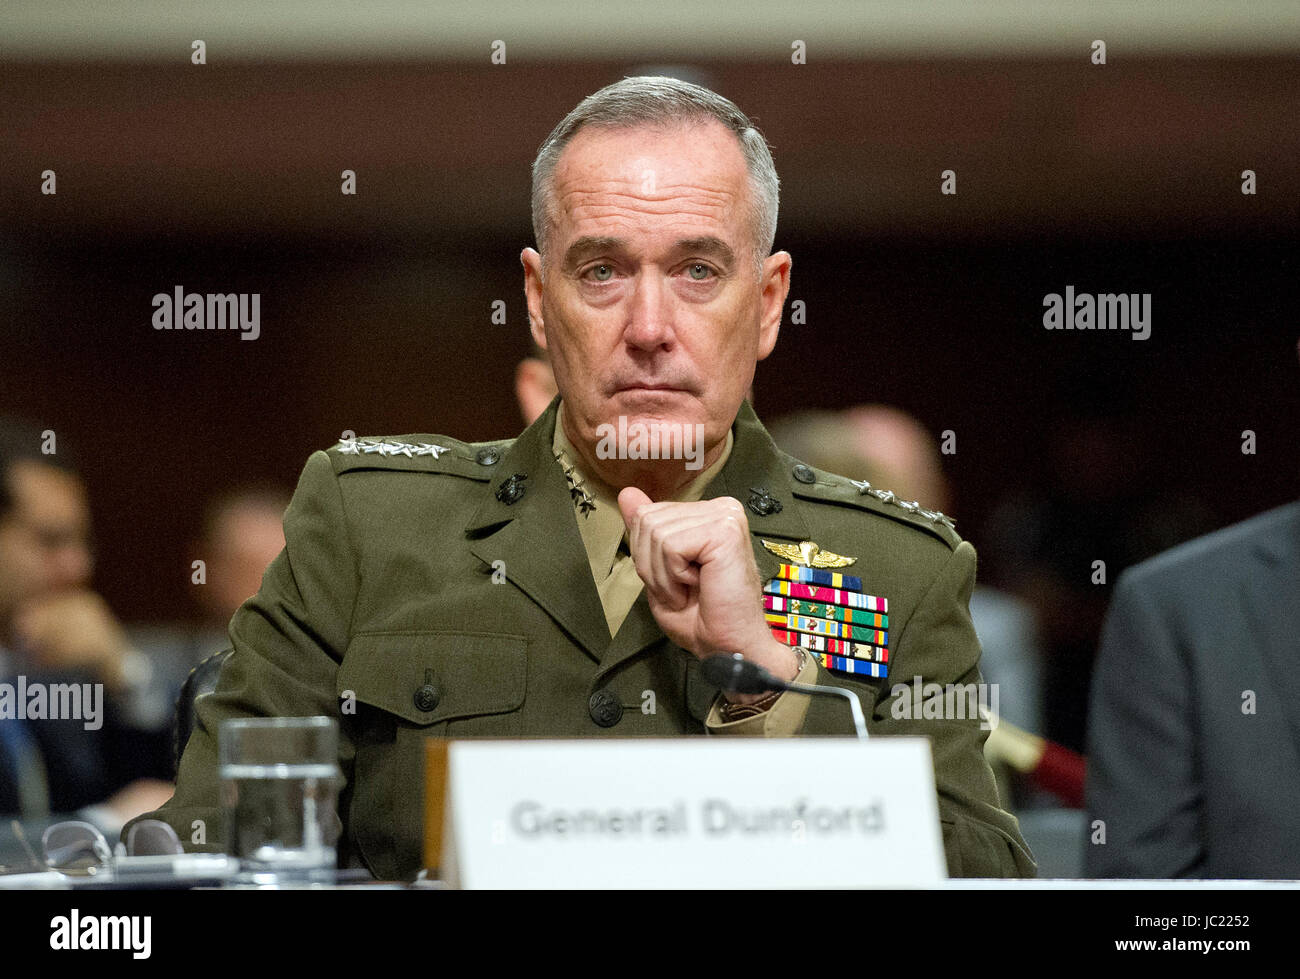 General Joseph F. Dunford, Jr., US Marine Corps, Chairman of the Joint Chiefs of Staff, gives testimony before the US Senate Committee on Armed Services on 'the Department of Defense budget posture in review of the Defense Authorization Request for Fiscal Year 2018 and the Future Years Defense Program' on Capitol Hill in Washington, DC on Tuesday, June 13, 2017. Credit: Ron Sachs/CNP /MediaPunch Stock Photo